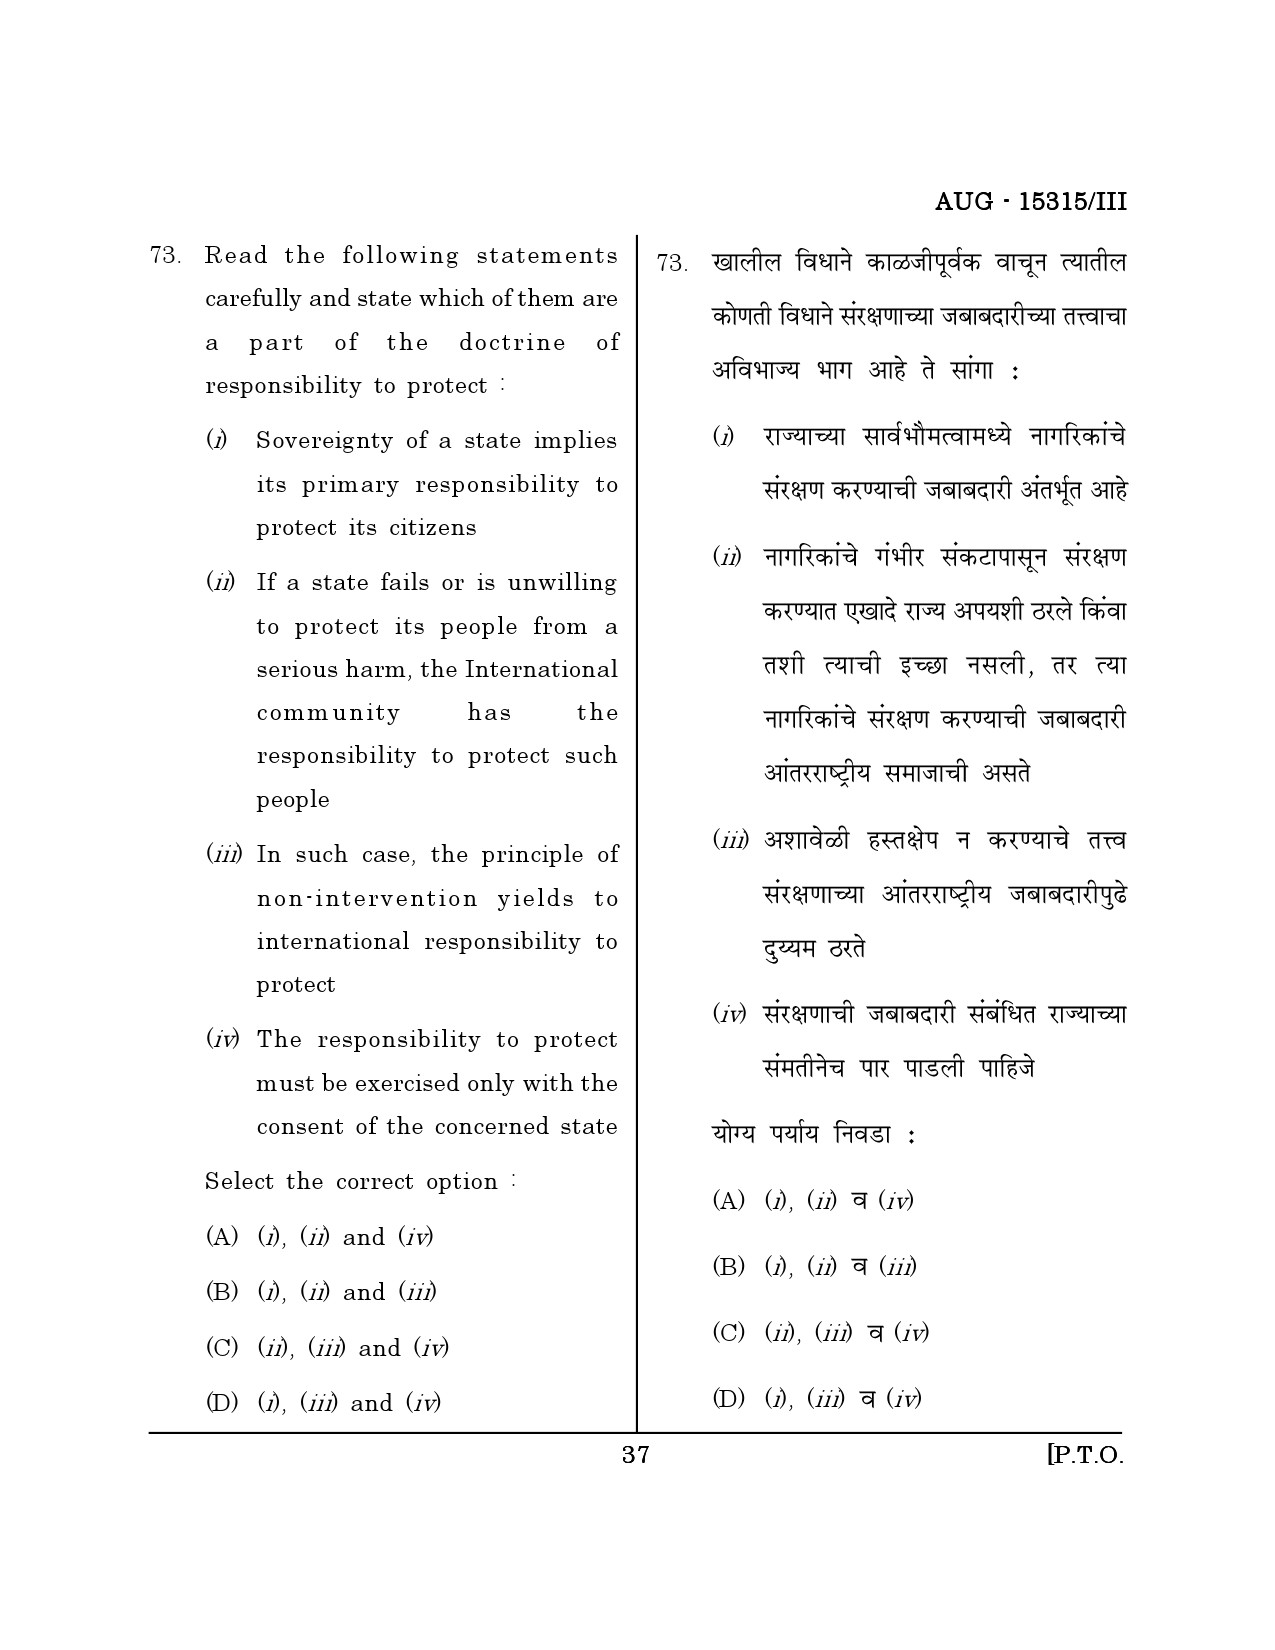 Maharashtra SET Political Science Question Paper III August 2015 36